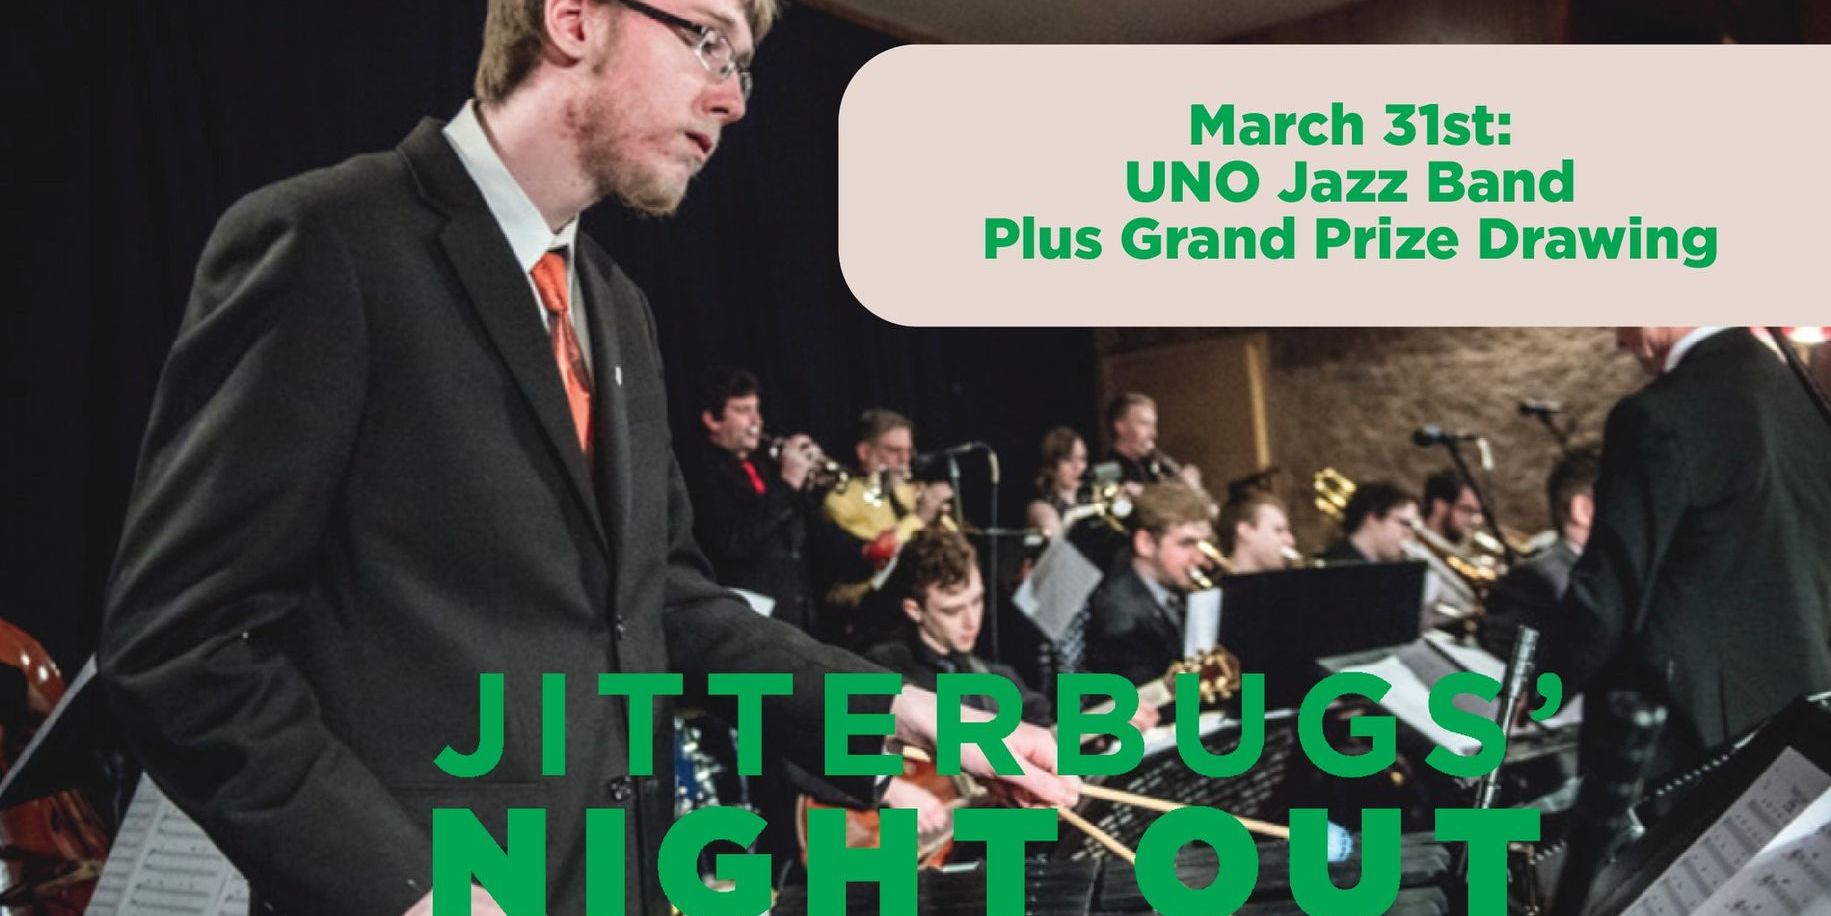 Jitterbugs' Night Out with the UNO Jazz Band promotional image